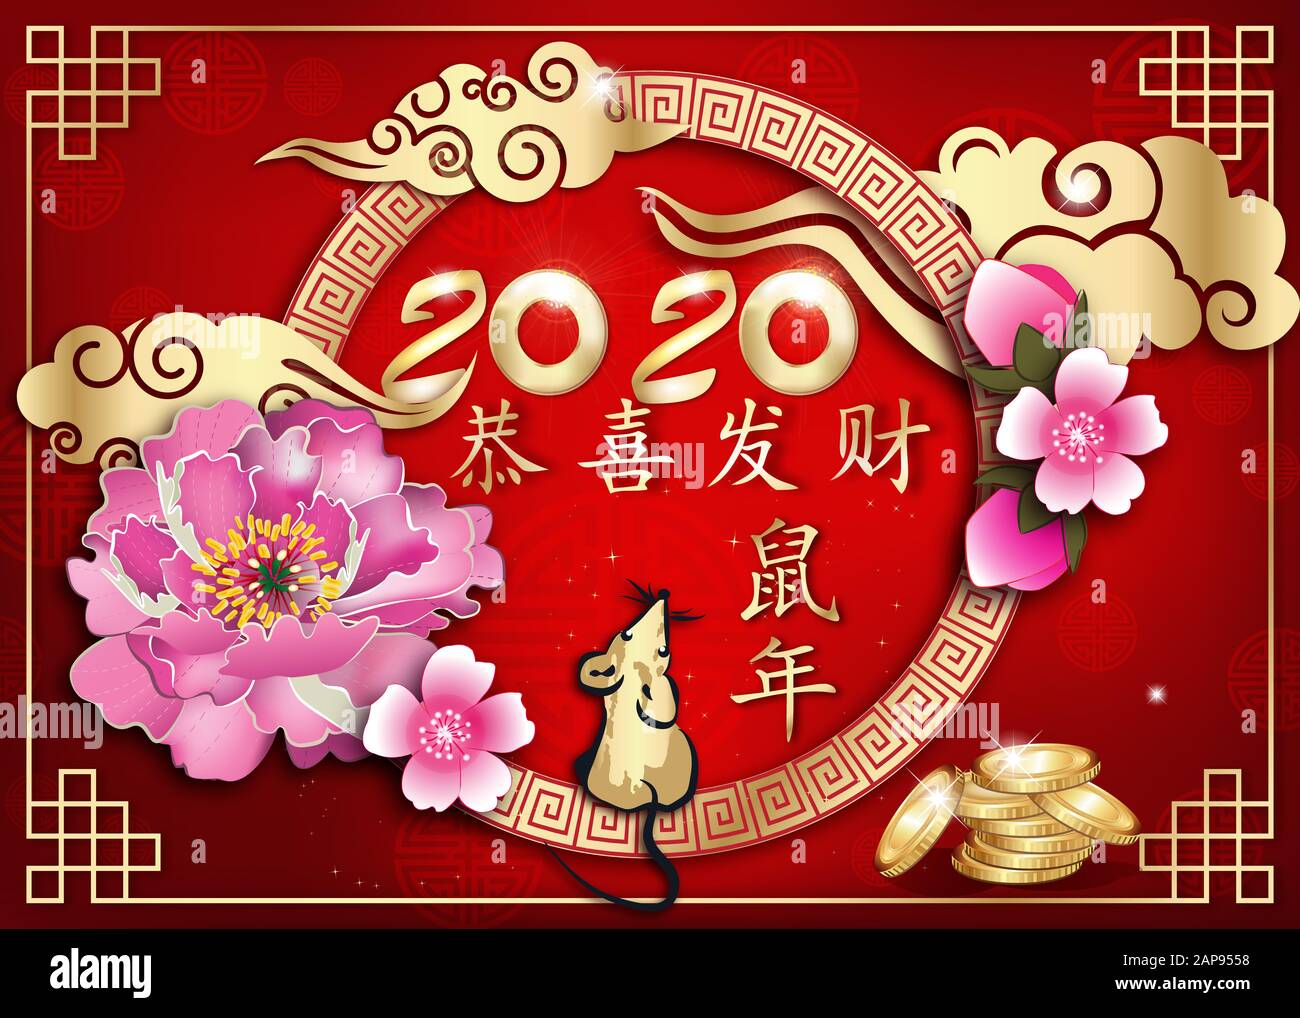 Happy Chinese New Year of the Metal Rat 2020! - greeting card with text in Chinese. Ideograms translation: Congratulations and get rich. Year of the R Stock Photo